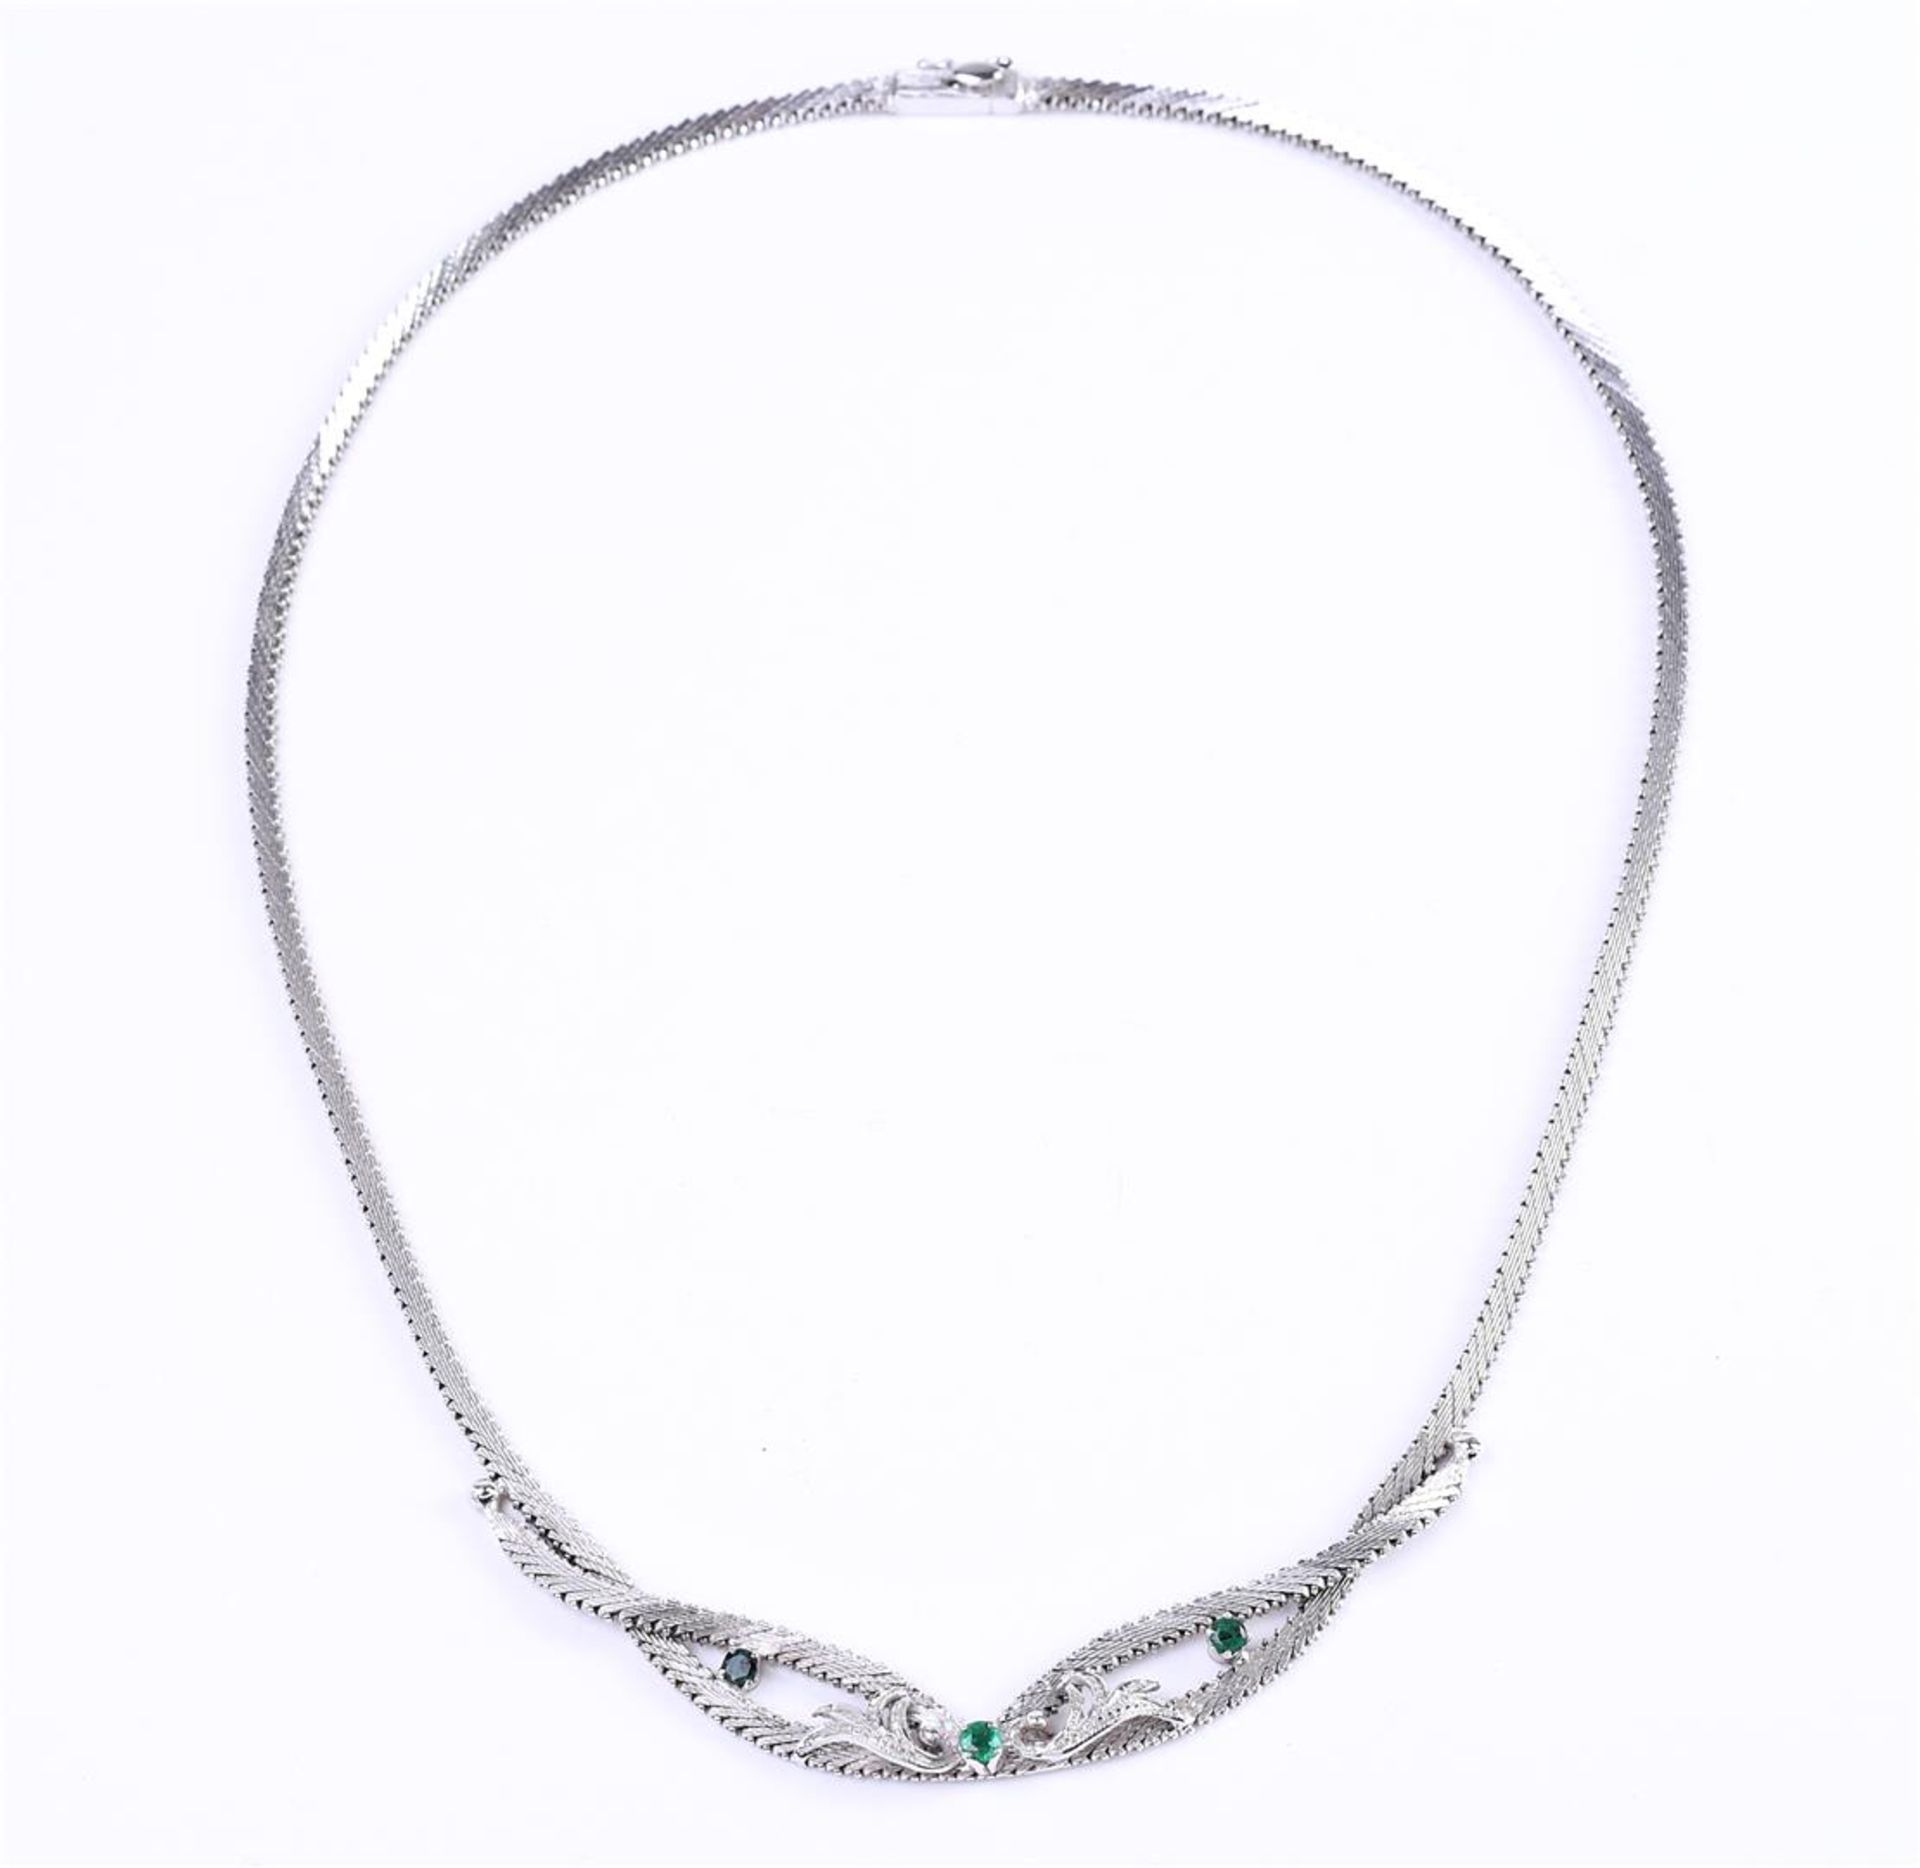 14 carat white gold women's choker necklace with a sliding clasp with extra safety figure - Bild 3 aus 7